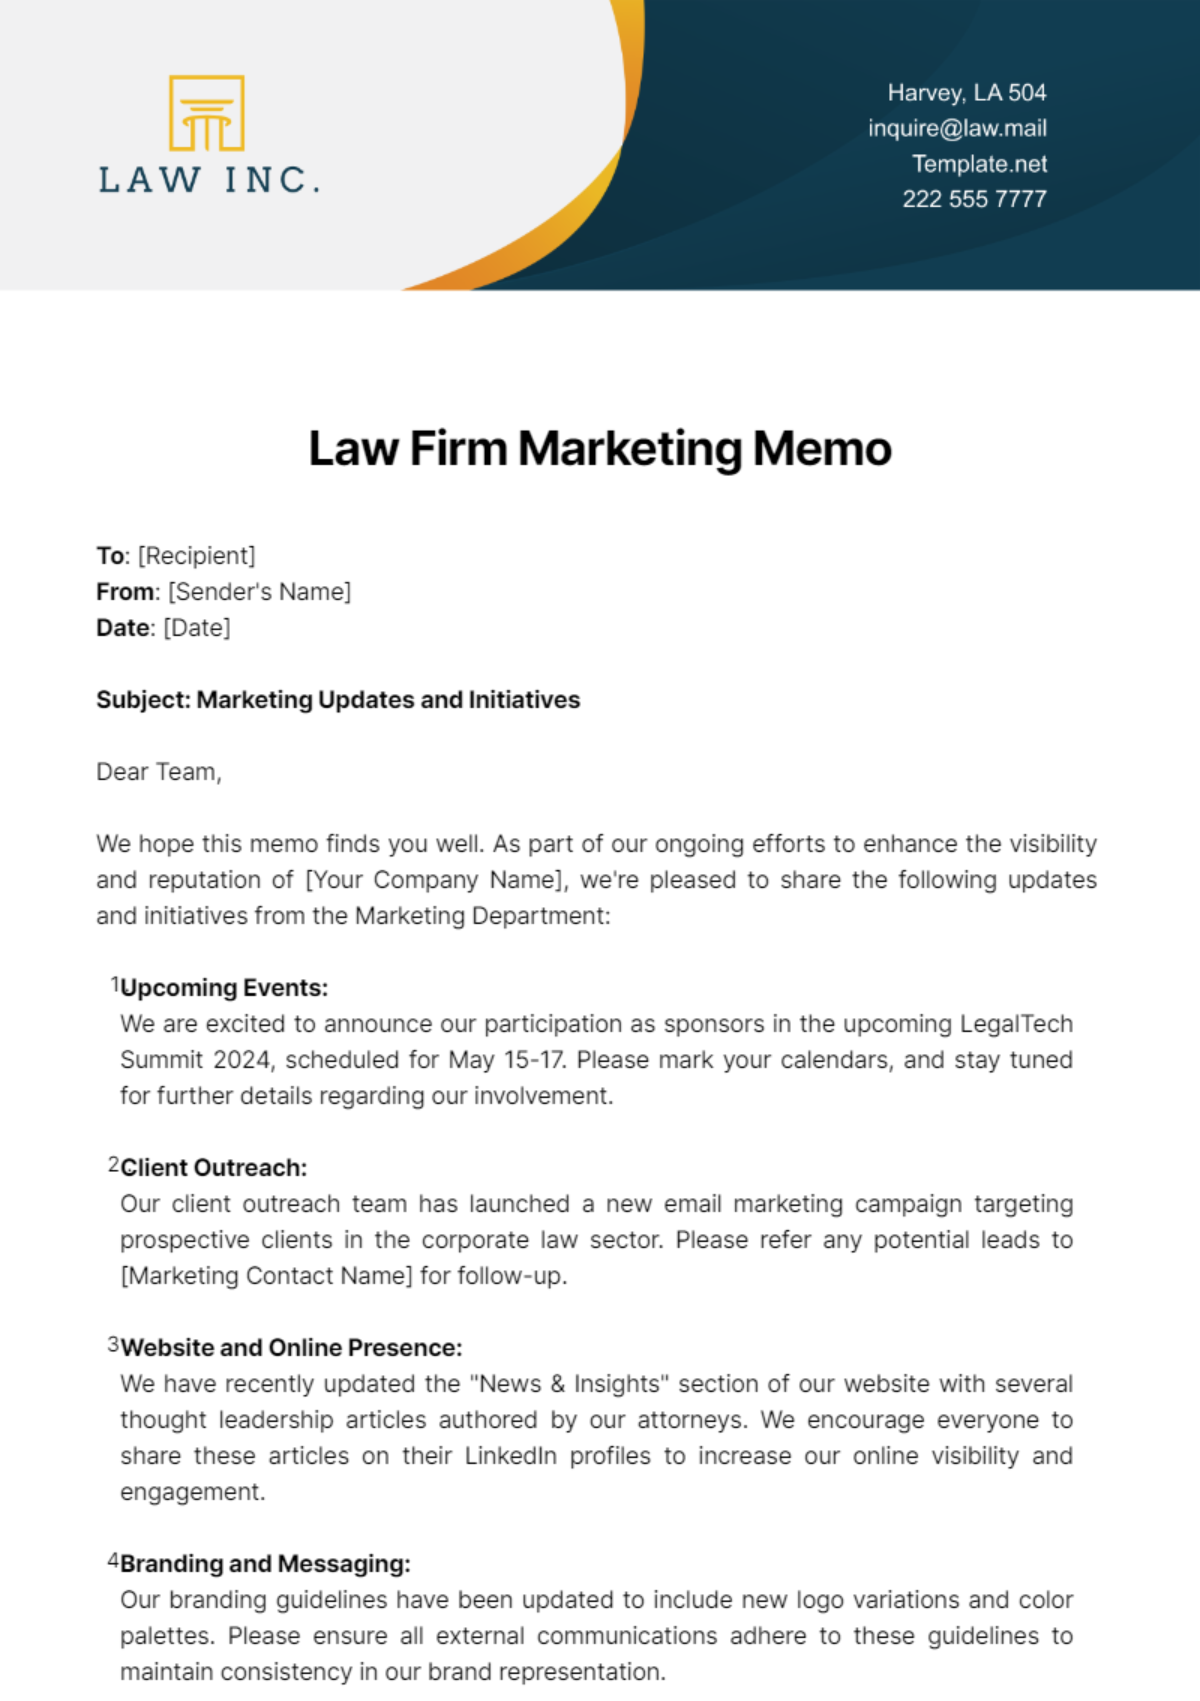 Law Firm Marketing Memo Template